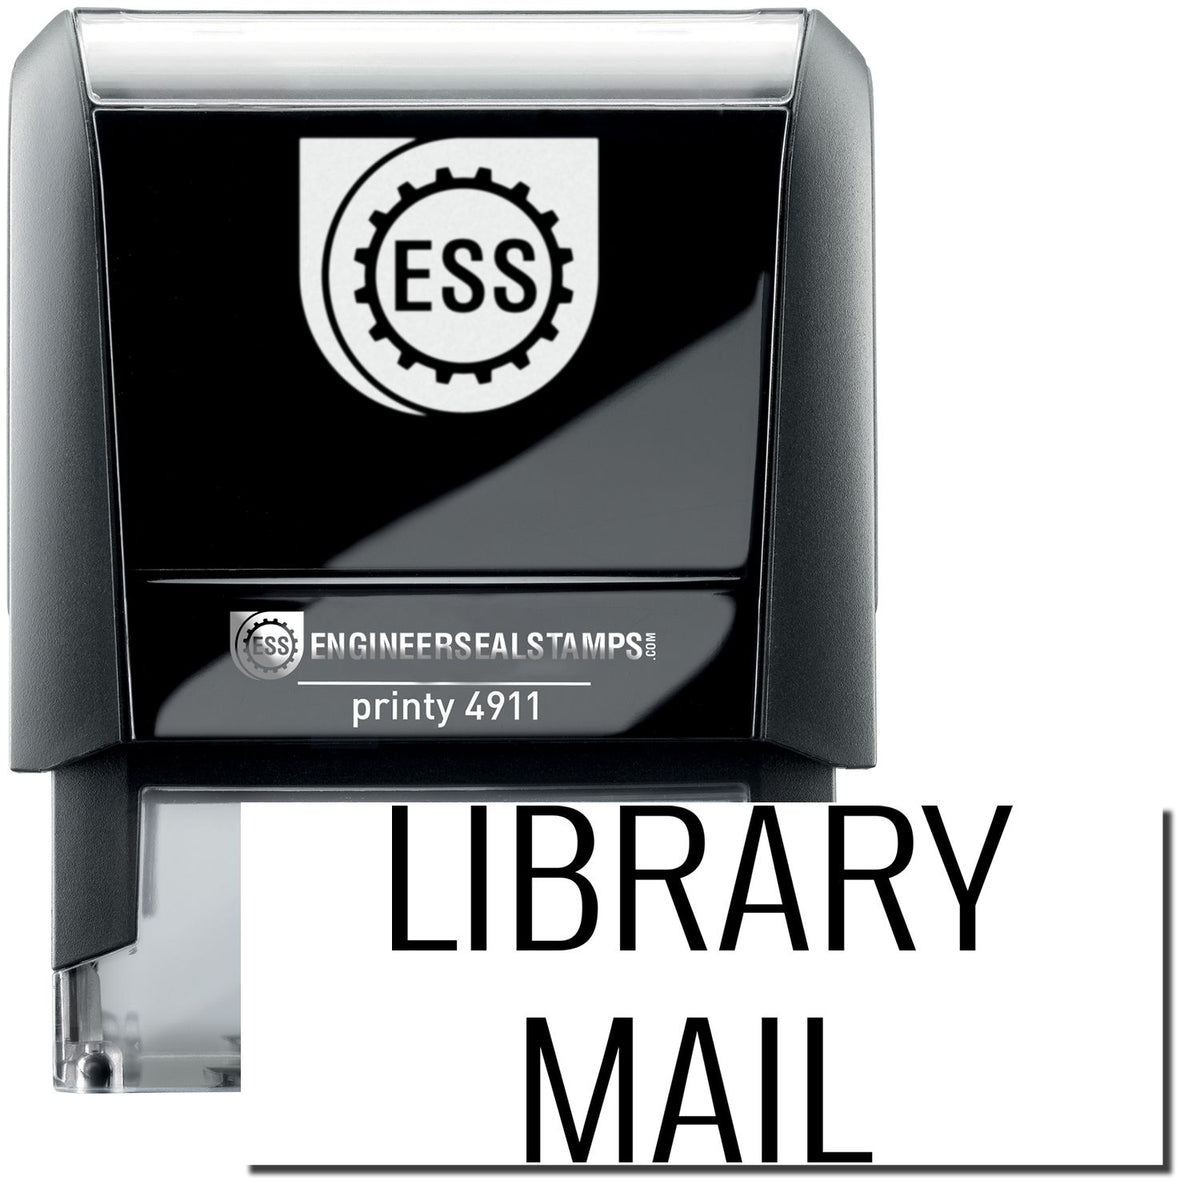 A self-inking stamp with a stamped image showing how the text &quot;LIBRARY MAIL&quot; is displayed after stamping.